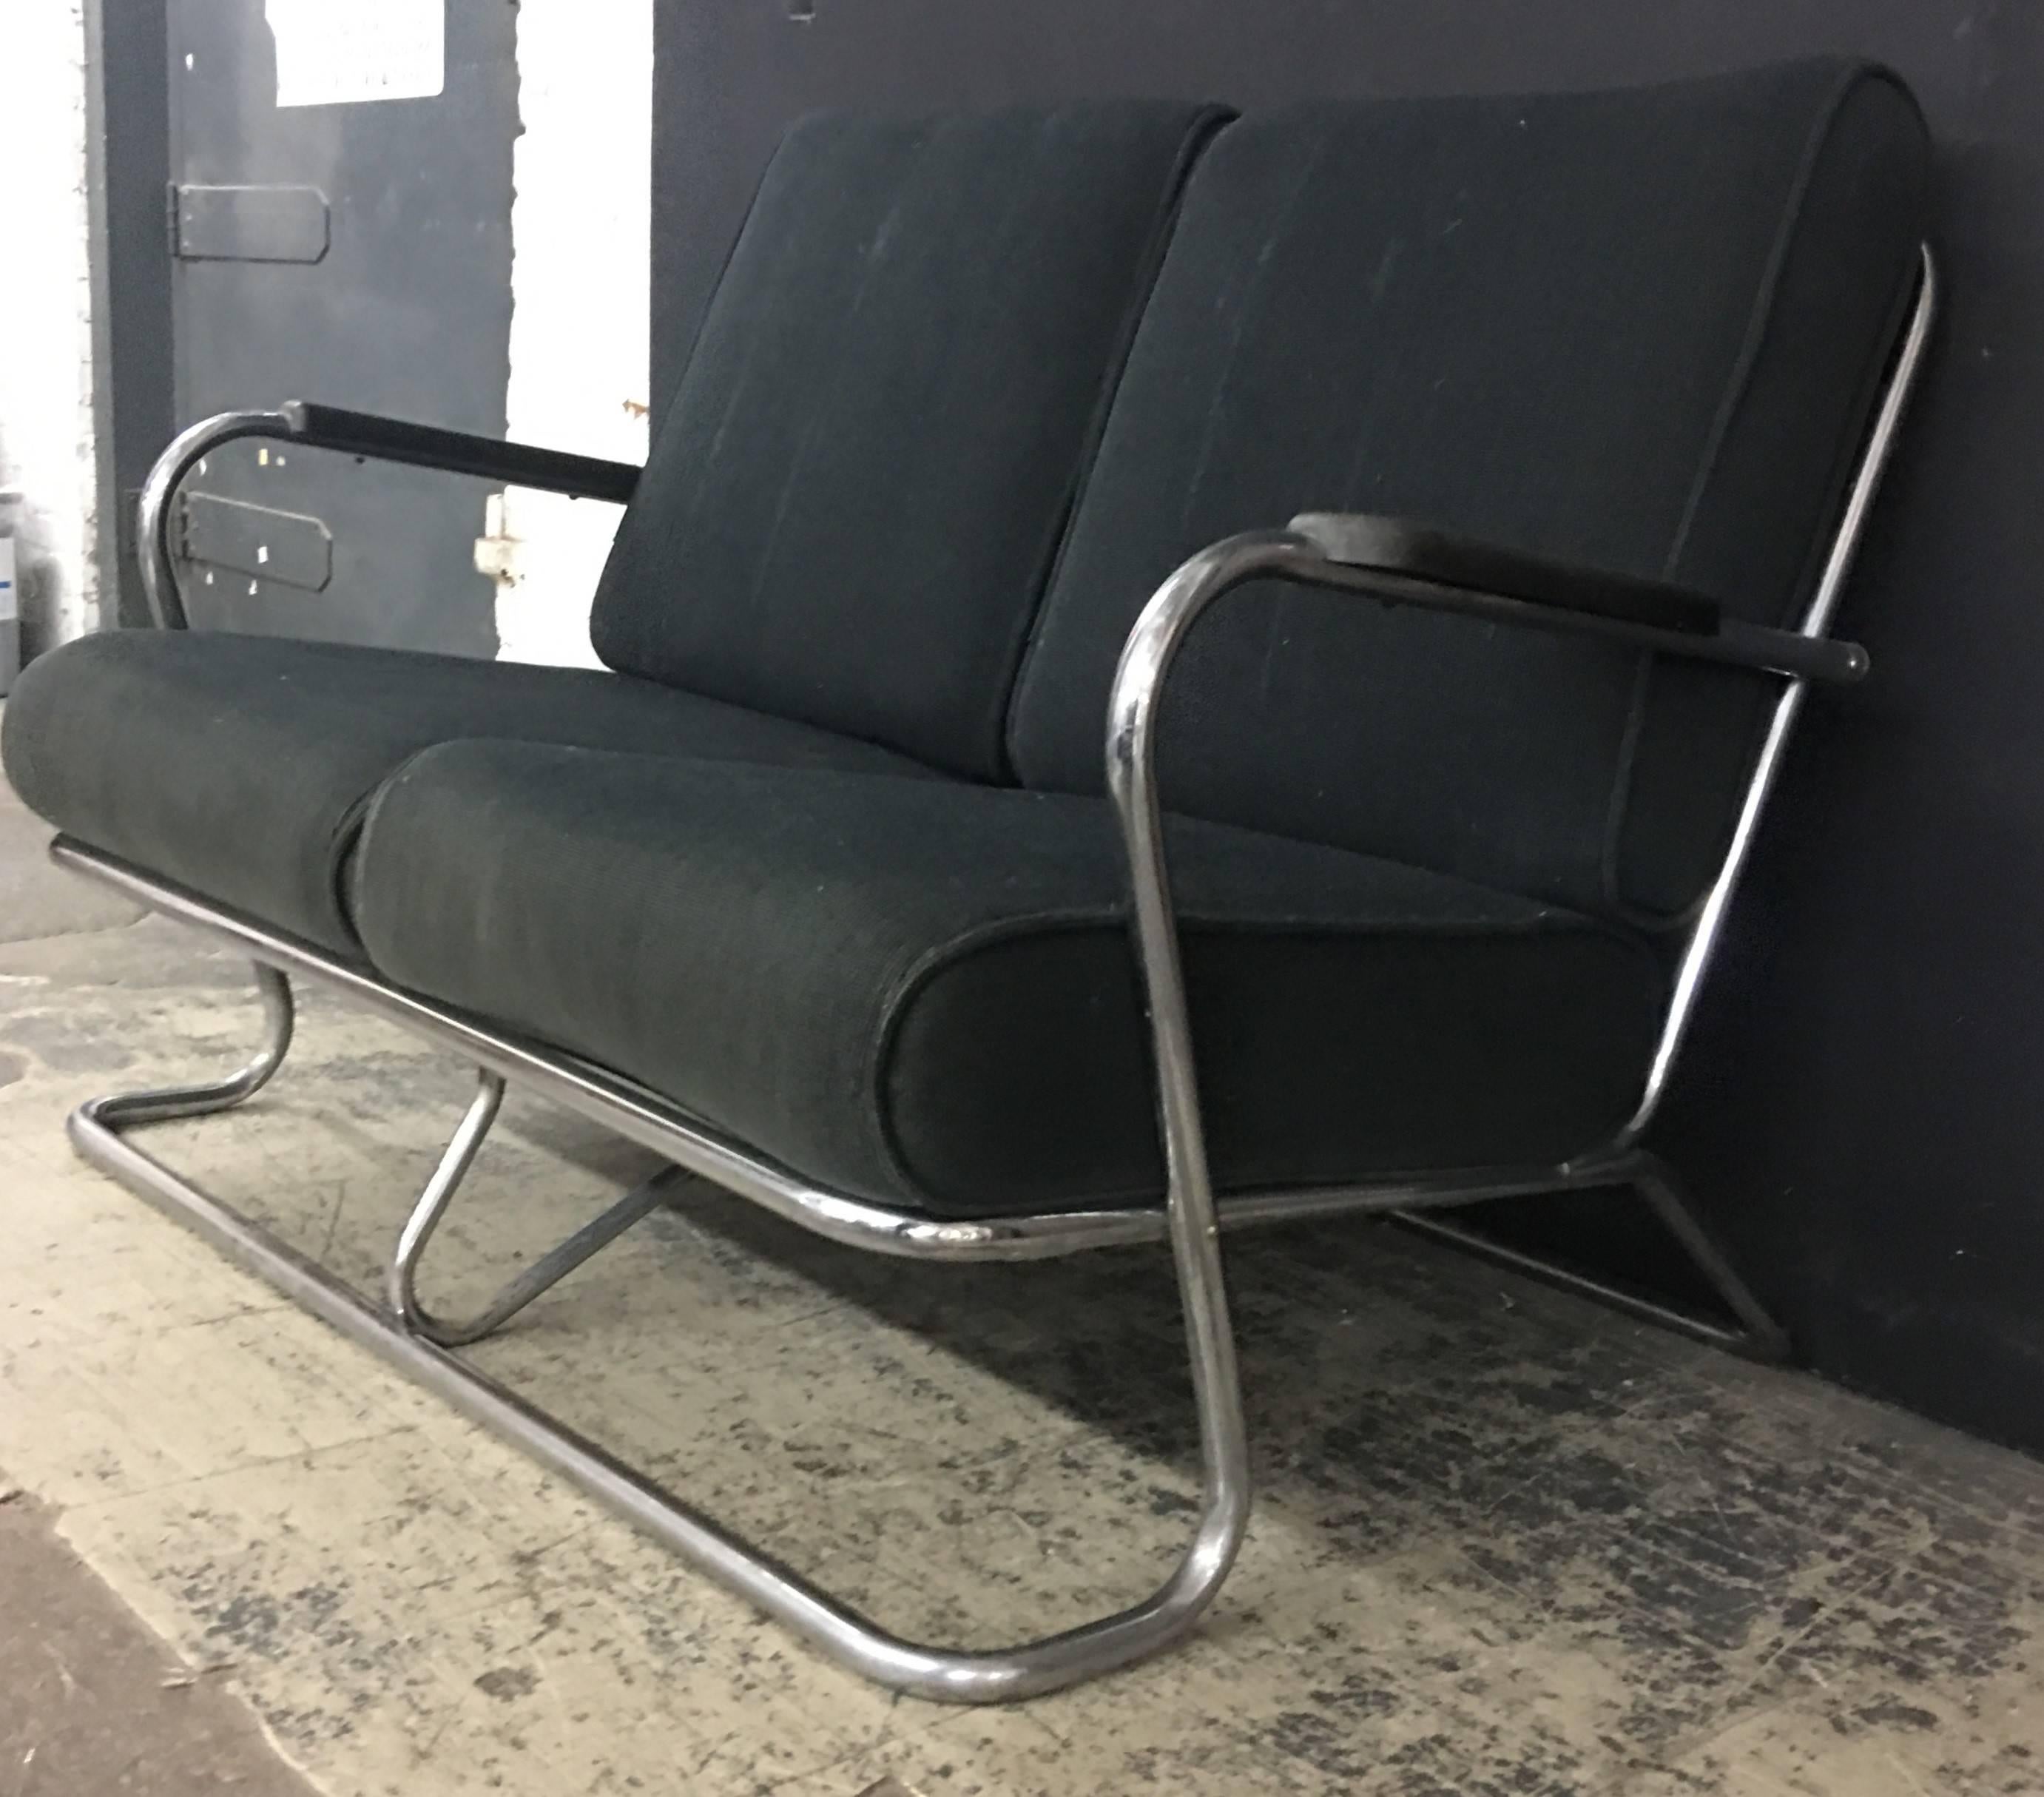 Kem Webber designed chrome tube sofa from Lloyd manufacturing. The sofa is in its original fabric. The arm height is 23